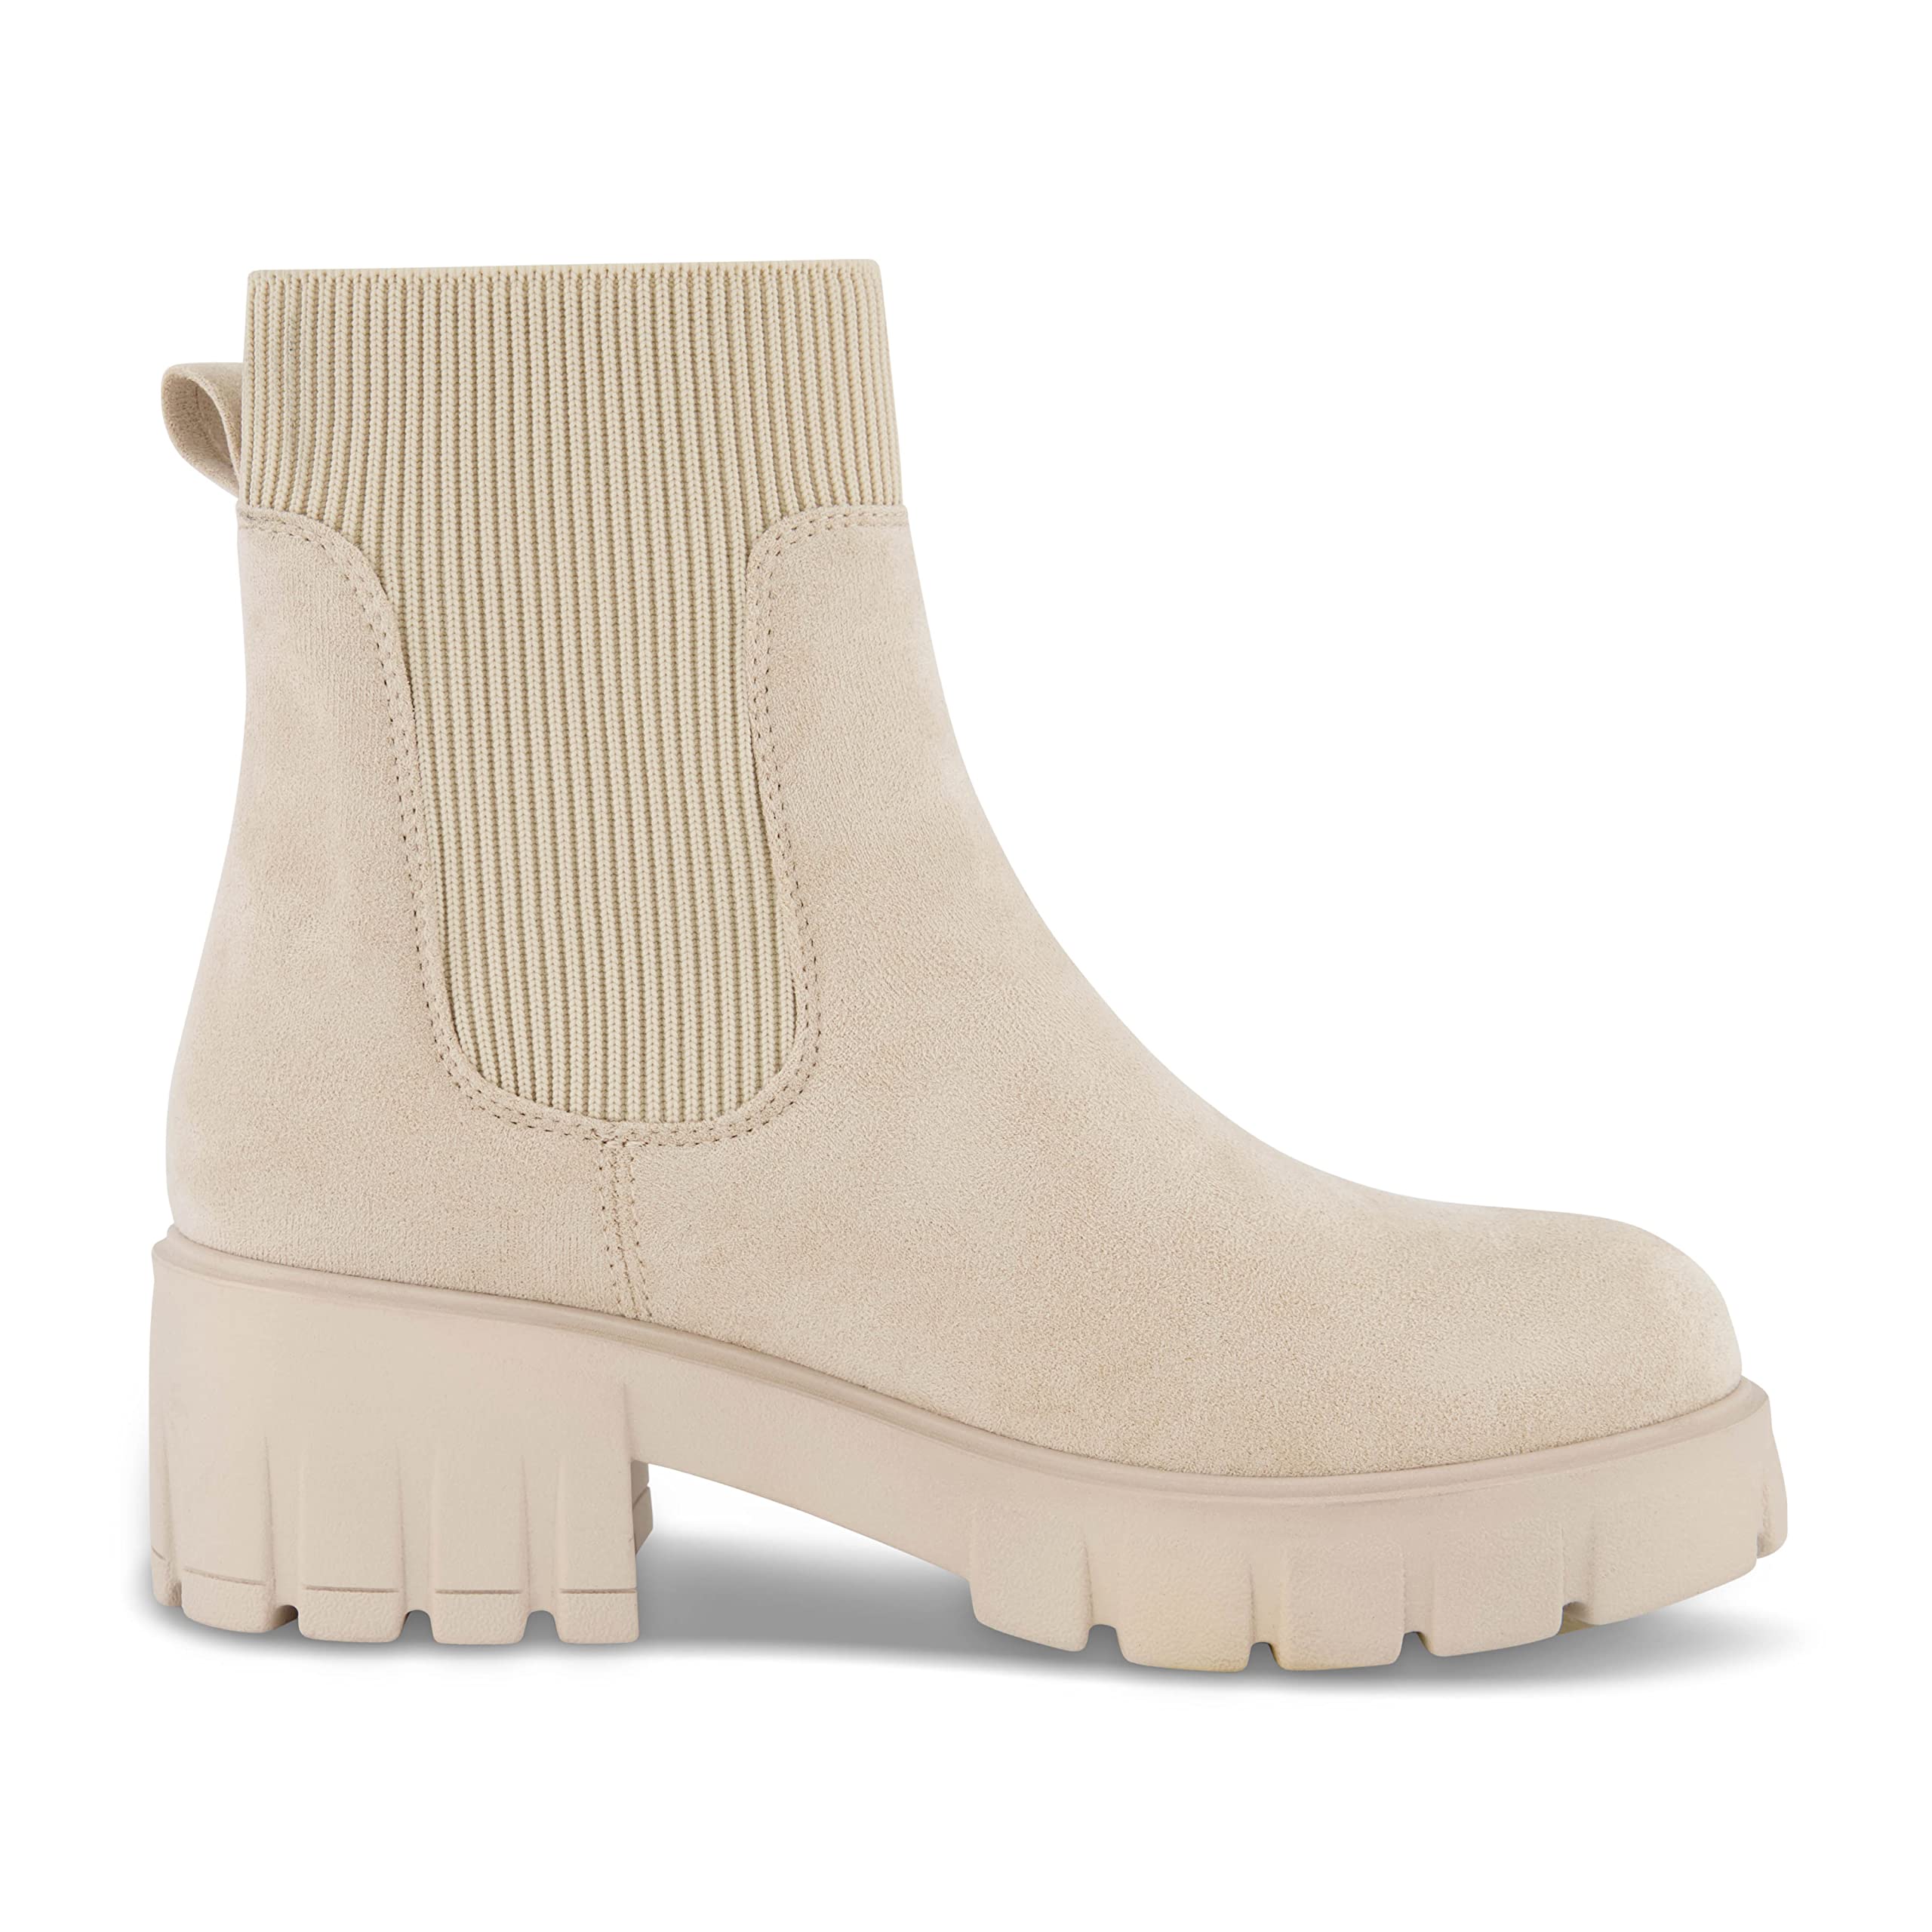 CUSHIONAIRE Women's Sparks slip on chelsea boot +Memory Foam, Wide Widths Available